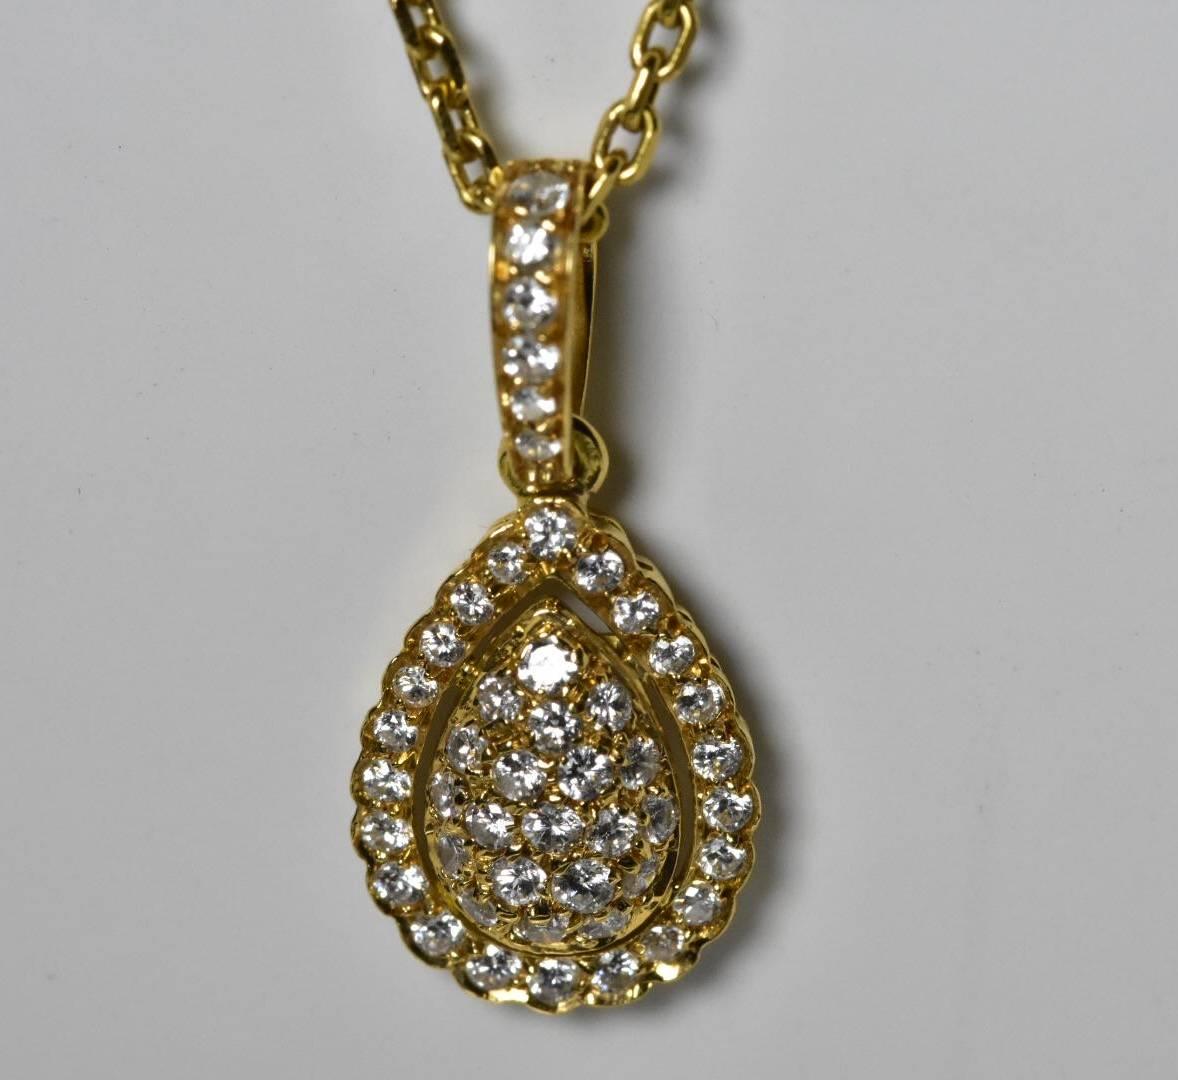 A beautiful Cartier Diamond Pendant Necklace necklace set in 18k yellow gold. The necklace features a pendant with forty-seven pave diamond of approx 0.90 carat weight. 
Lenght: 16.2 inches 
Hallmarks:  Cartier 750 reference 108914
Diamond weight: